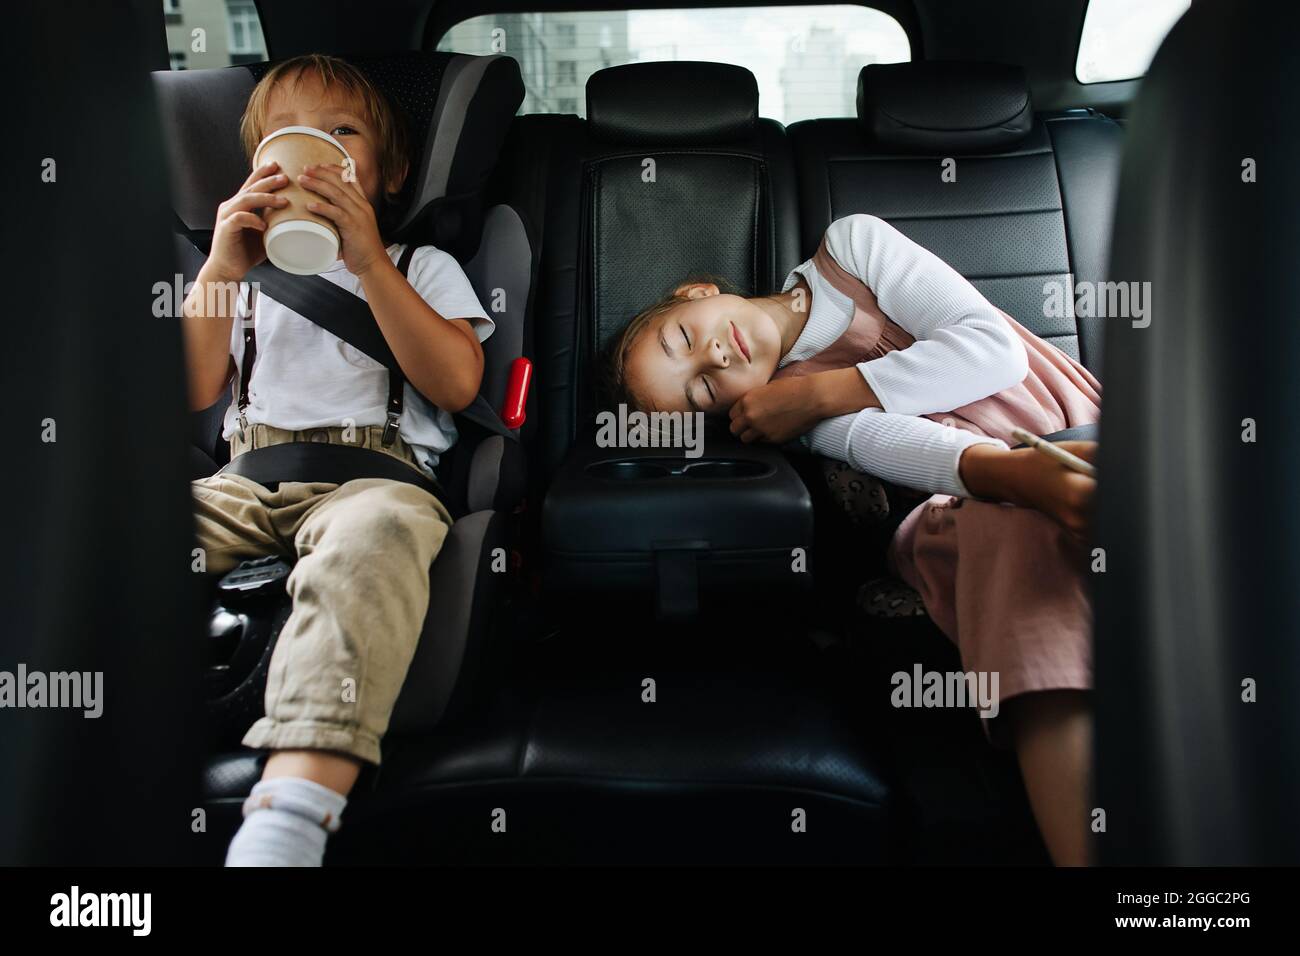 Bored siblings riding on a back seat in a car. View from inside salon. Boy is drinking from plastic cup, girl is napping. Stock Photo